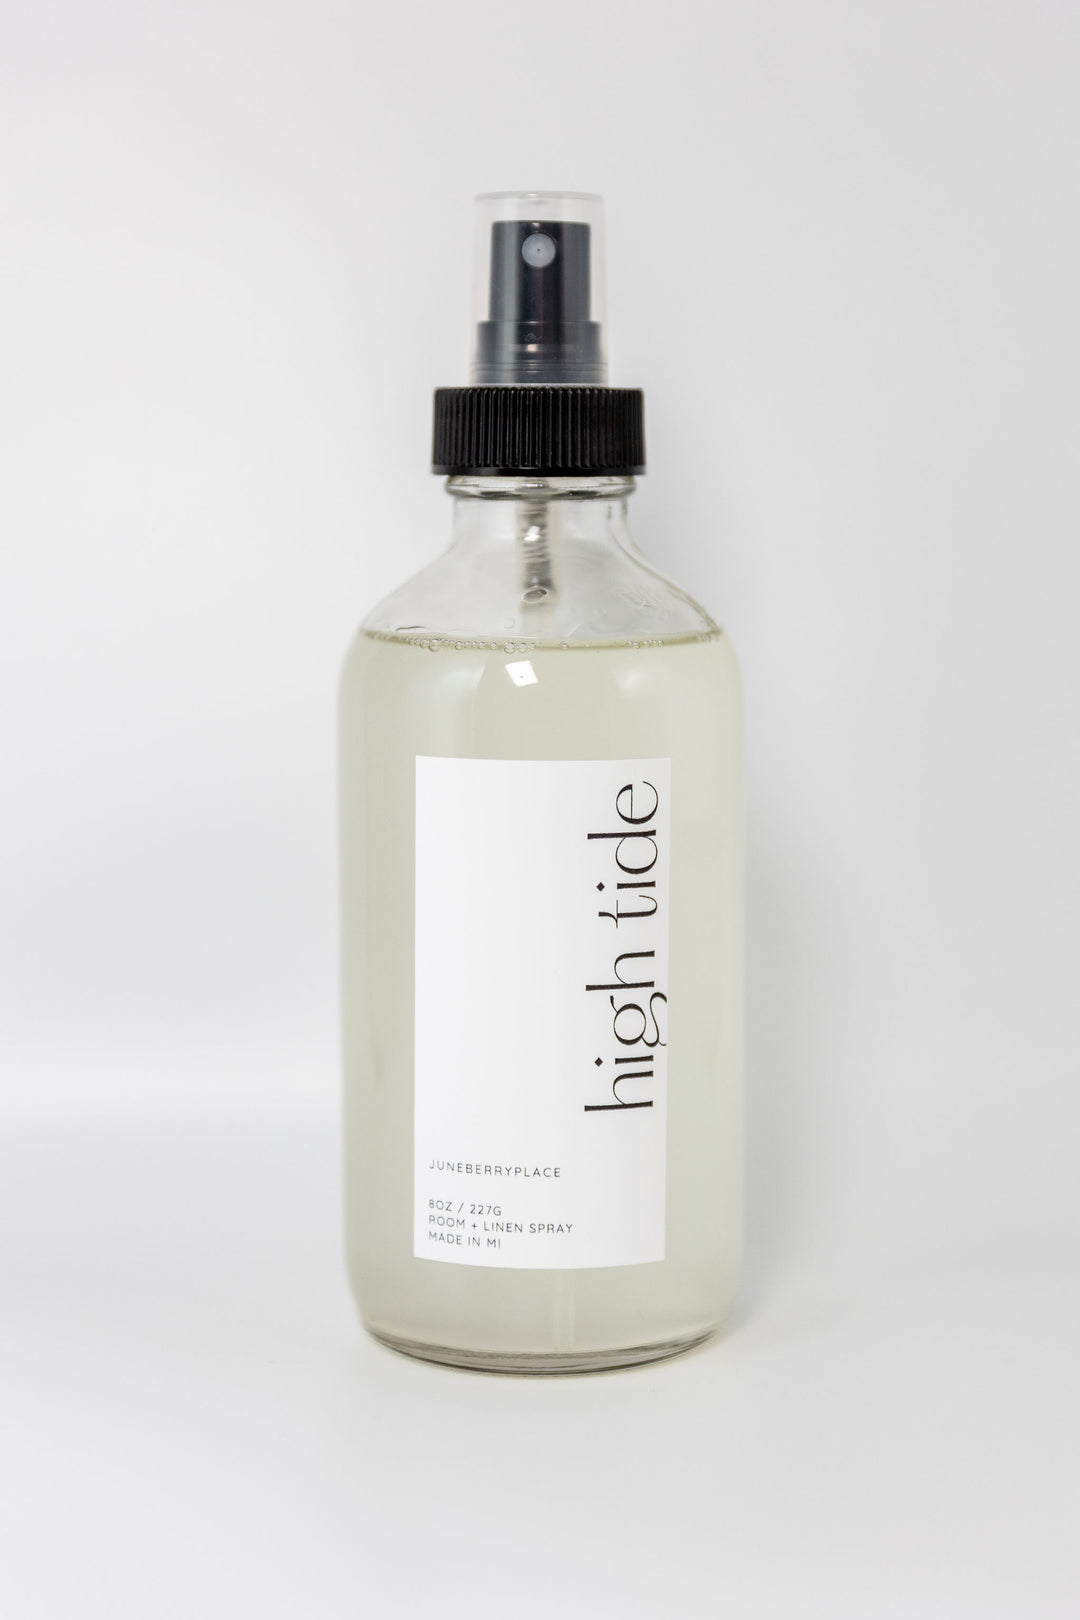 High Tide Room and Linen Spray - Spring Collection in a glass bottle by juneberryplace home fragrances